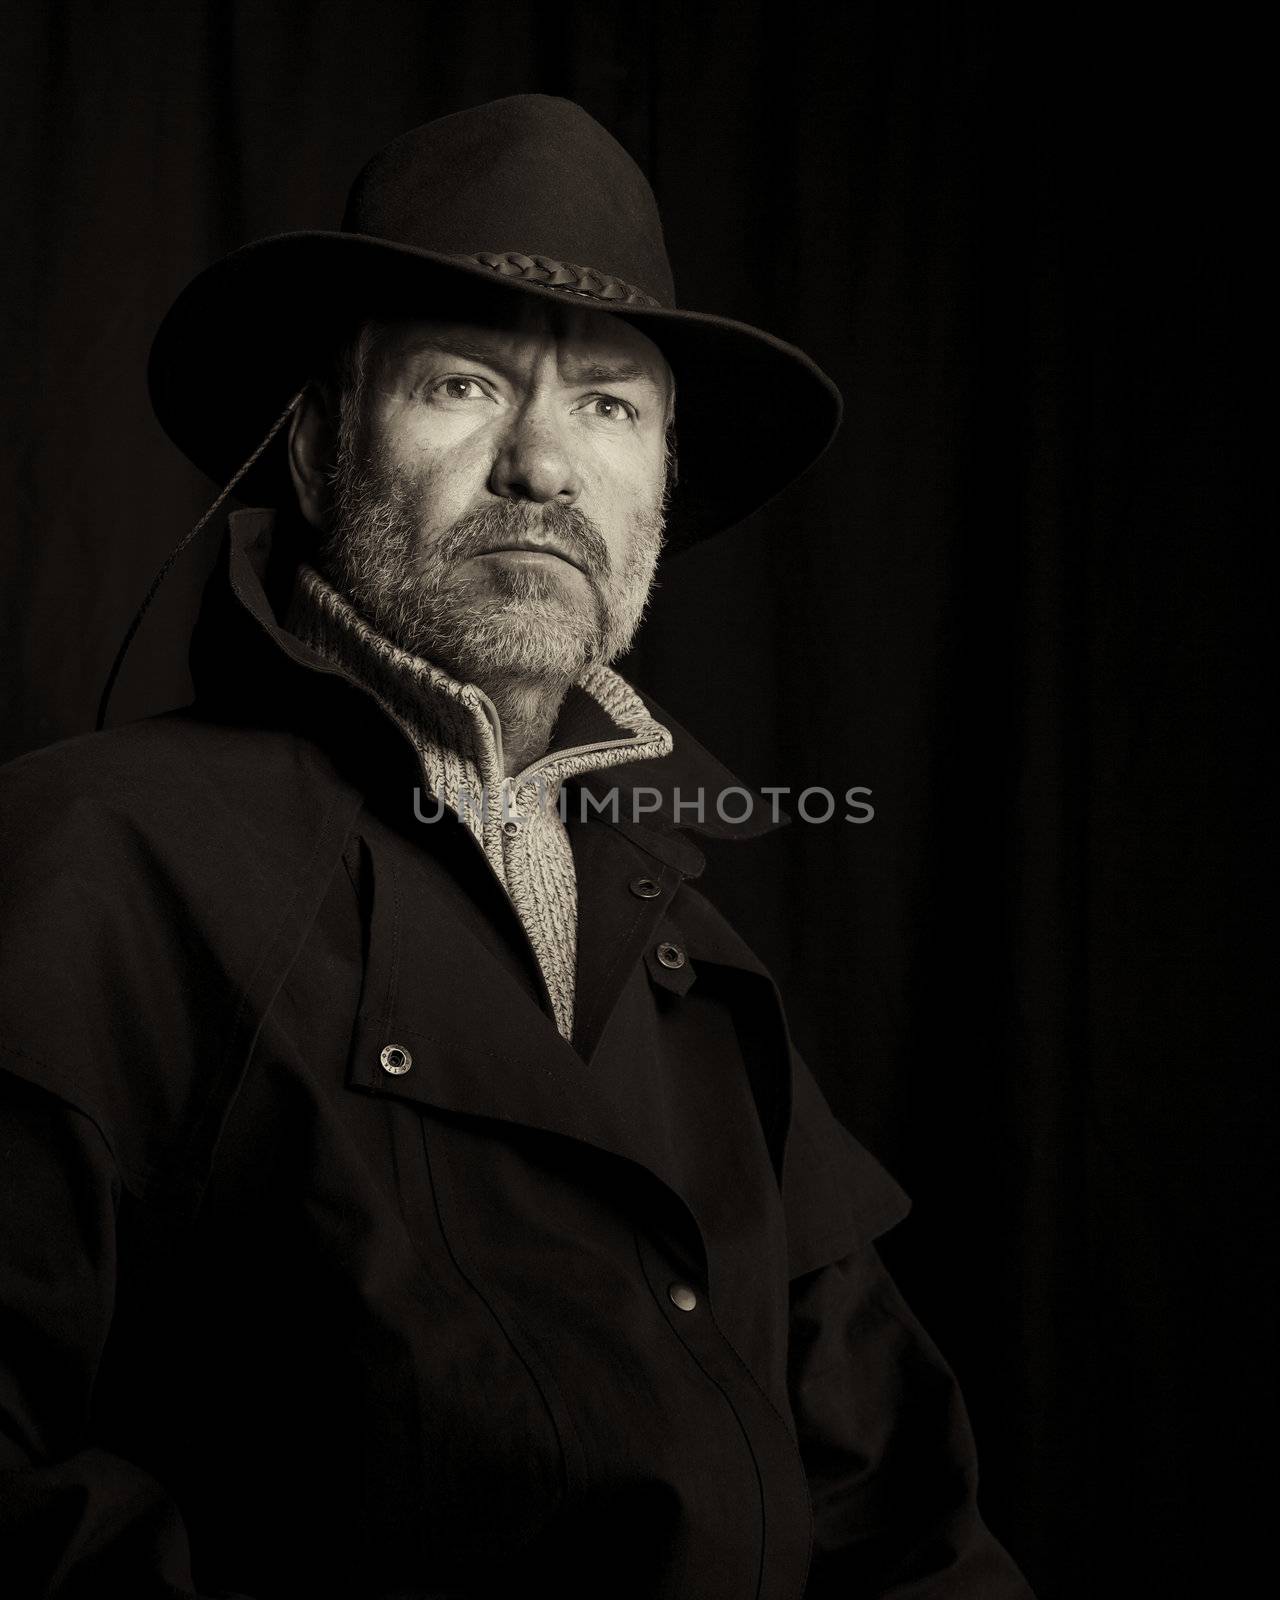 Old style portrait of a rugged looking cowboy